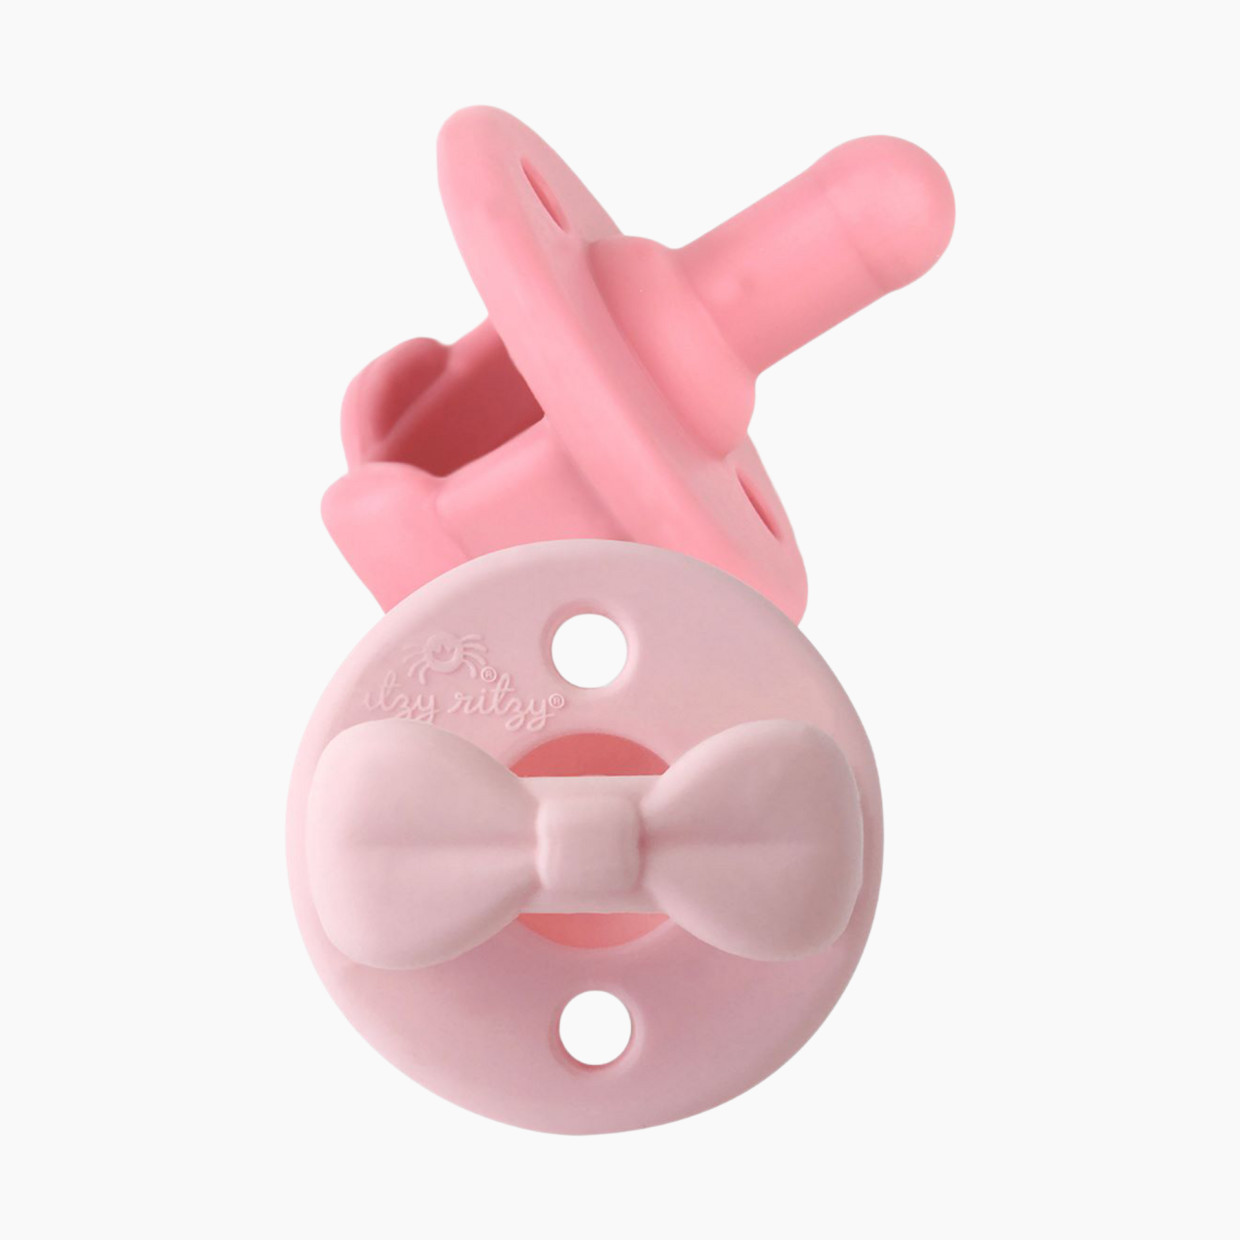 Itzy Ritzy 2-Pack Silicone Pacifiers - Pink.